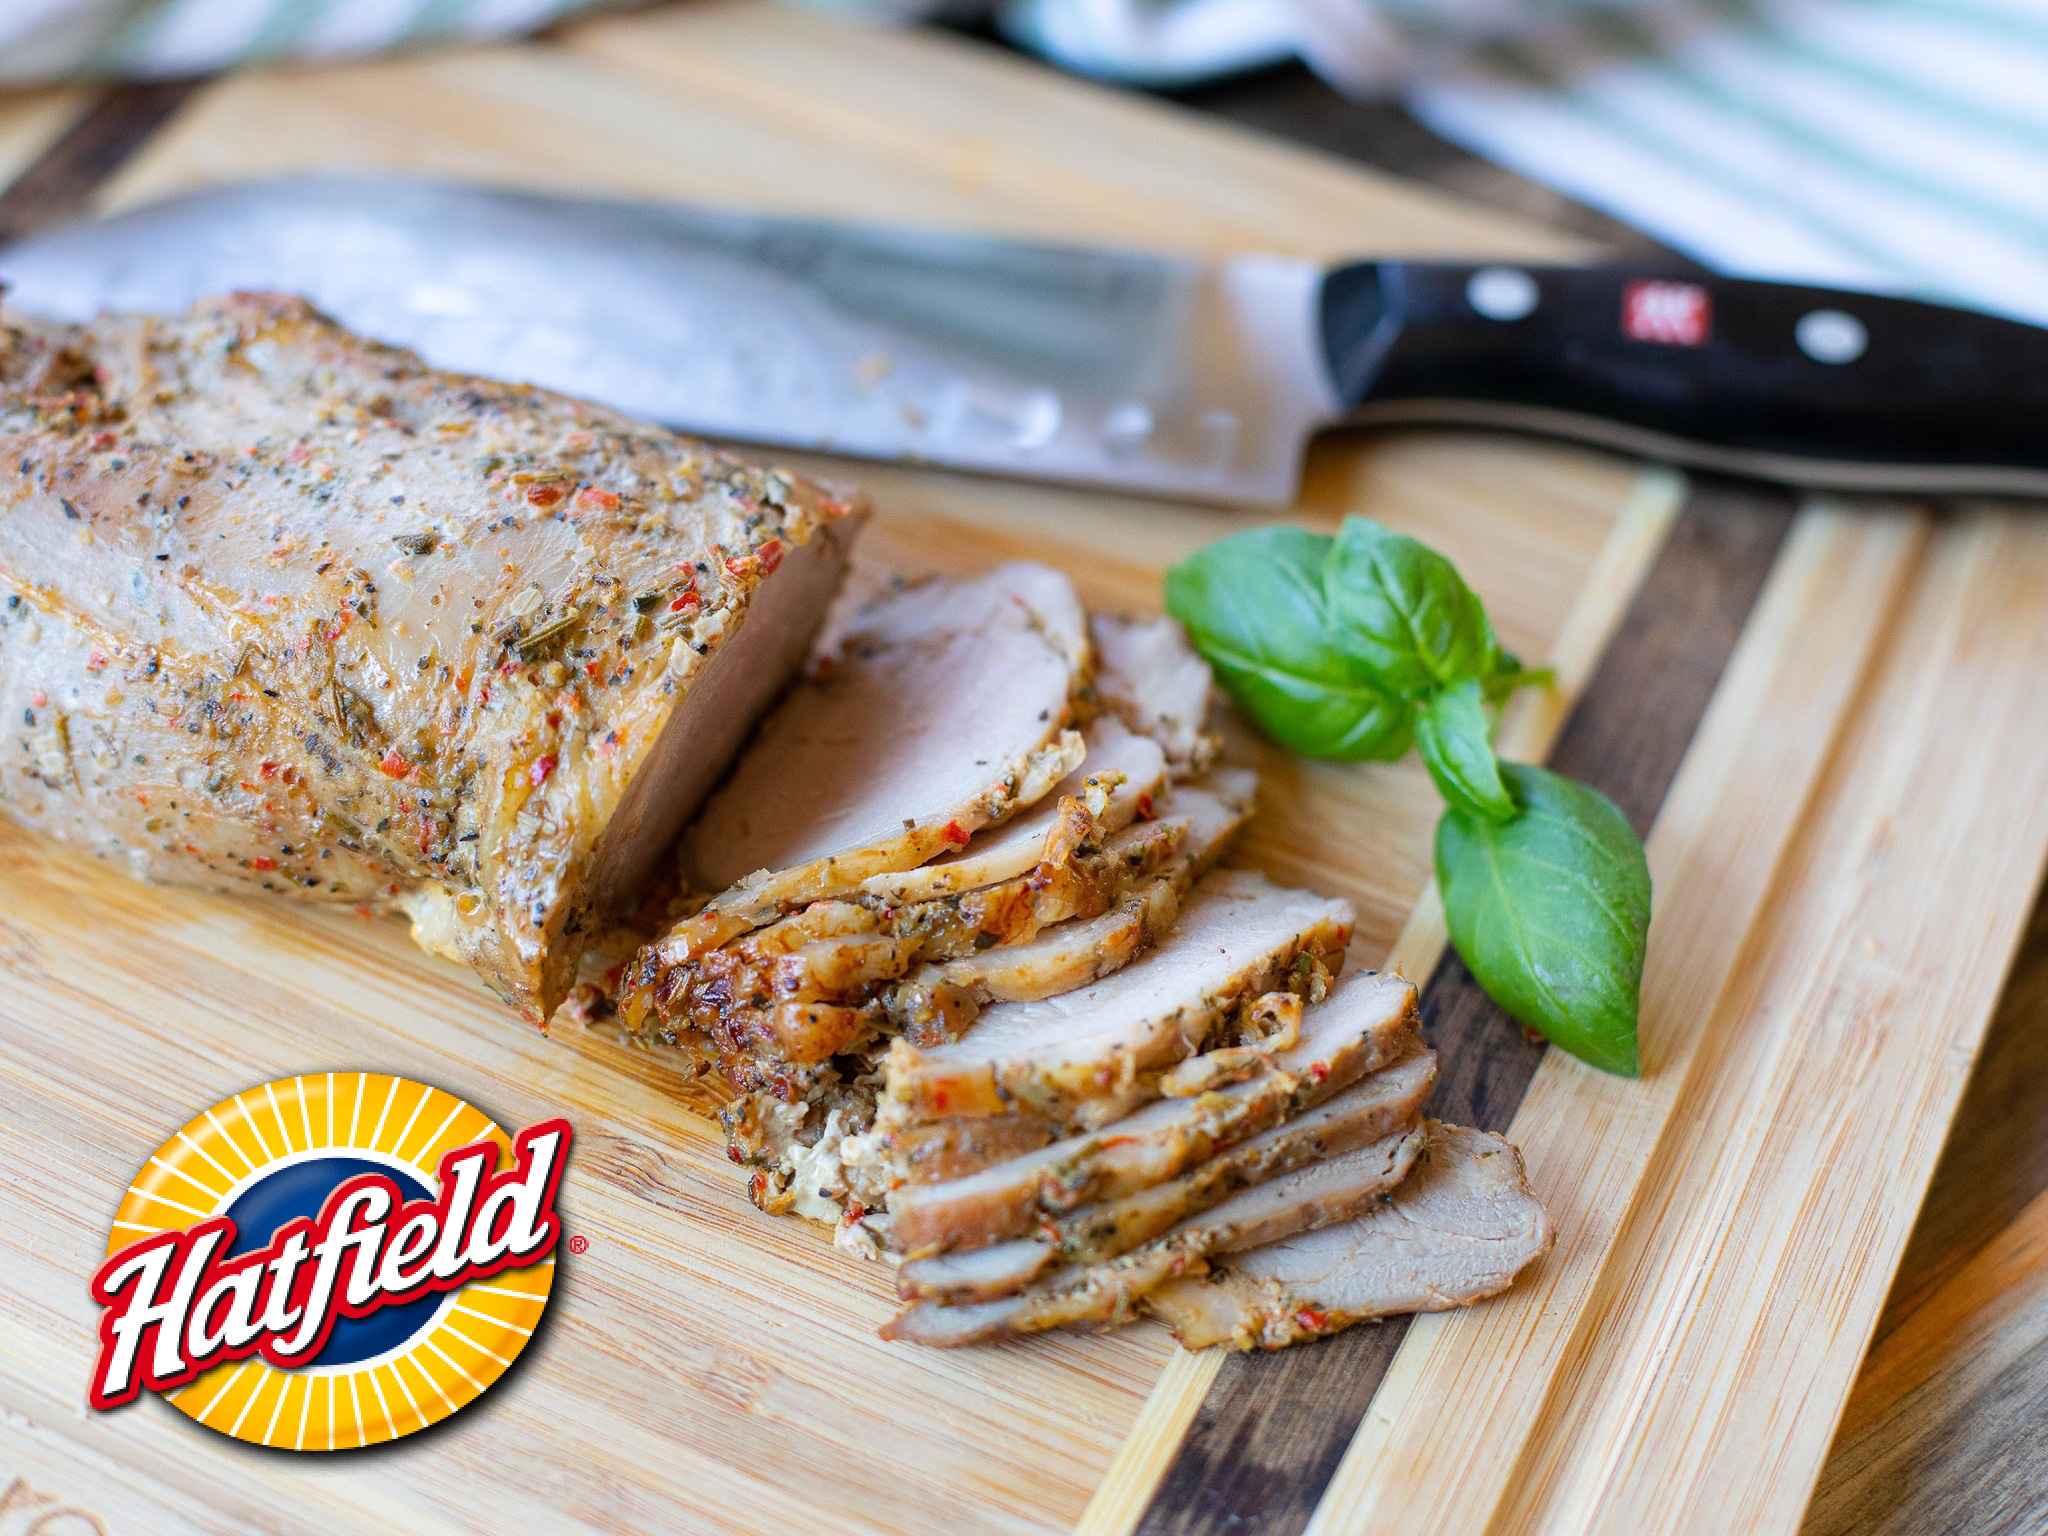 Hatfield Pork Tenderloin And Loin Filet Products Are Perfect For 